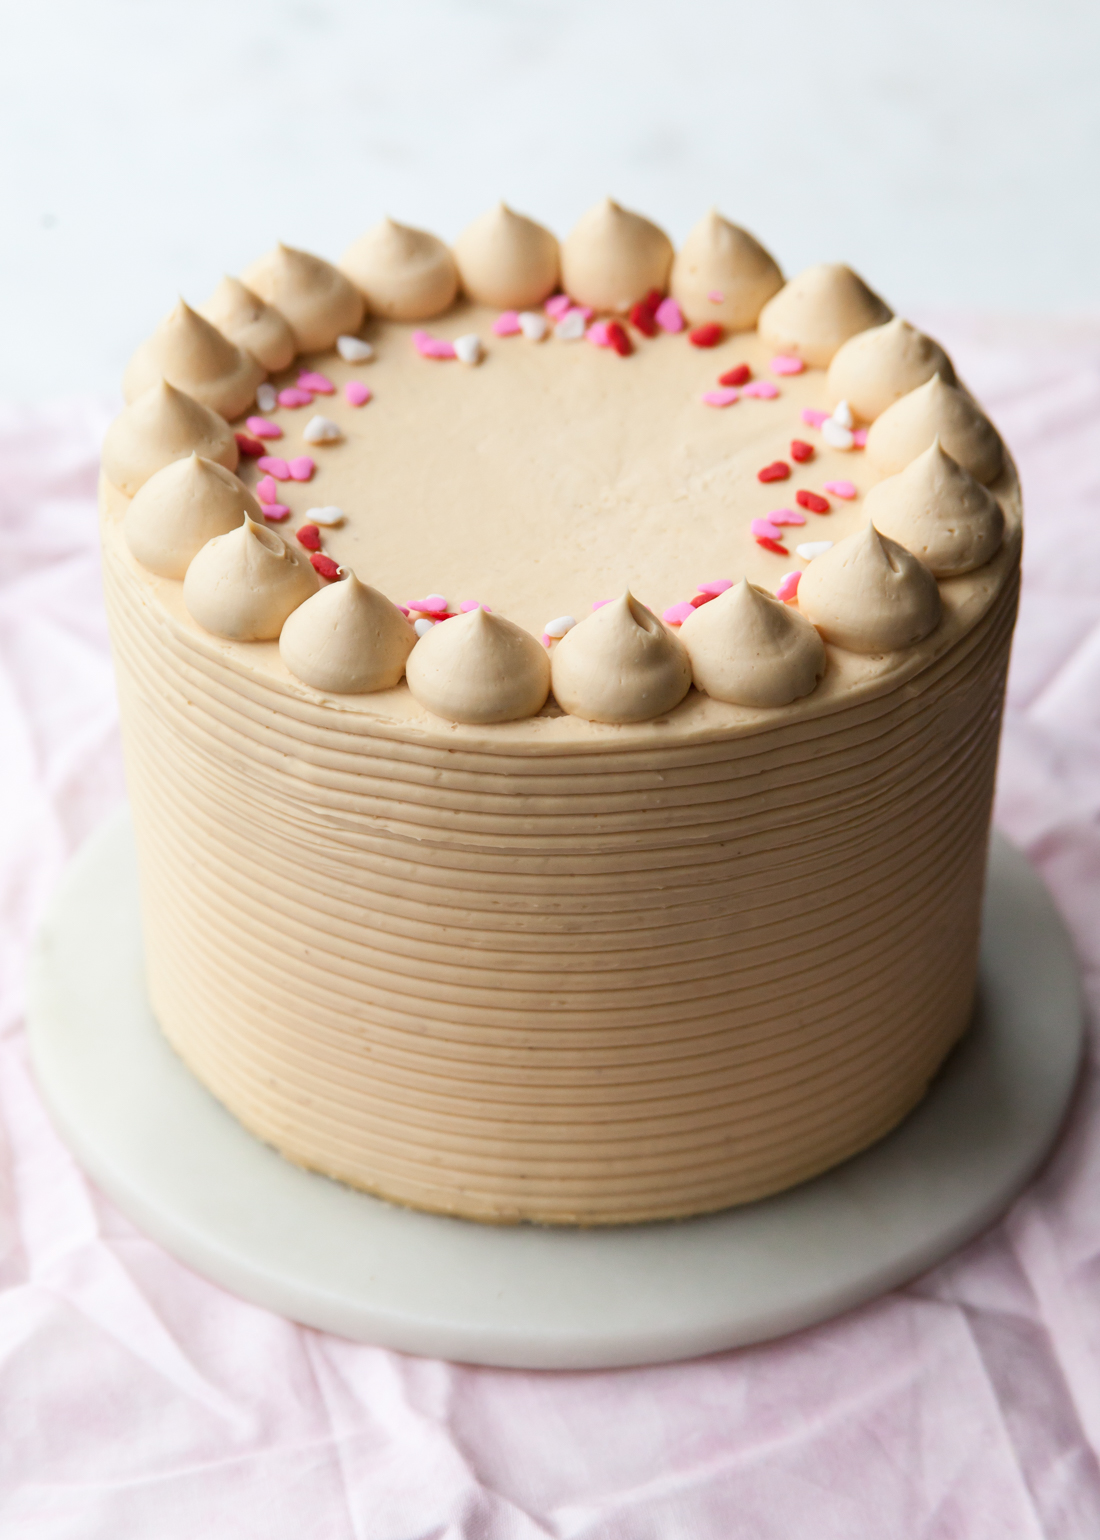 Chocolate cake with caramel pastry cream and caramel buttercream for Valentine's Day.